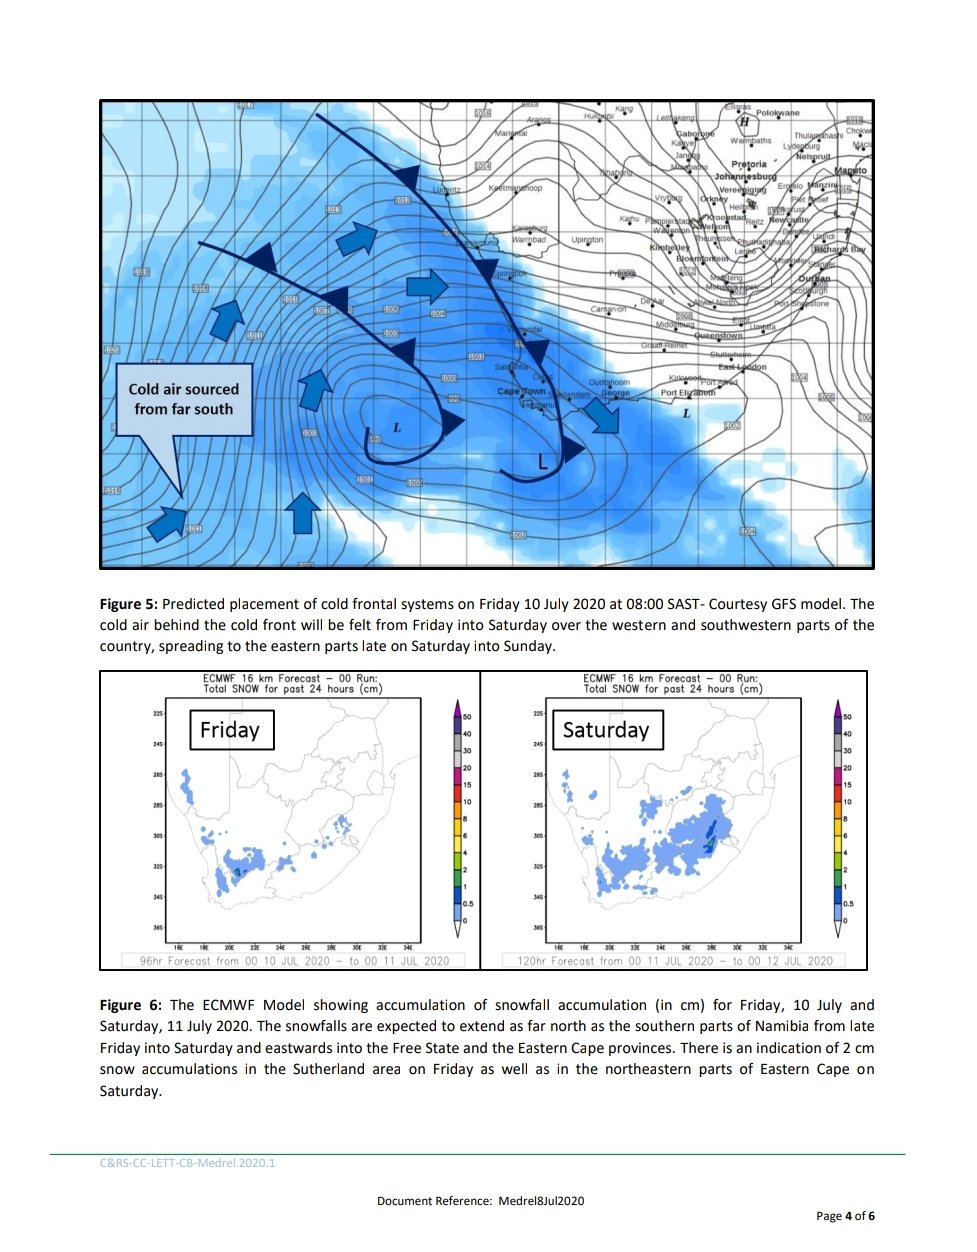 media release 2 cold fronts to bring bitterly cold weather and snow to South Africa #coldfront